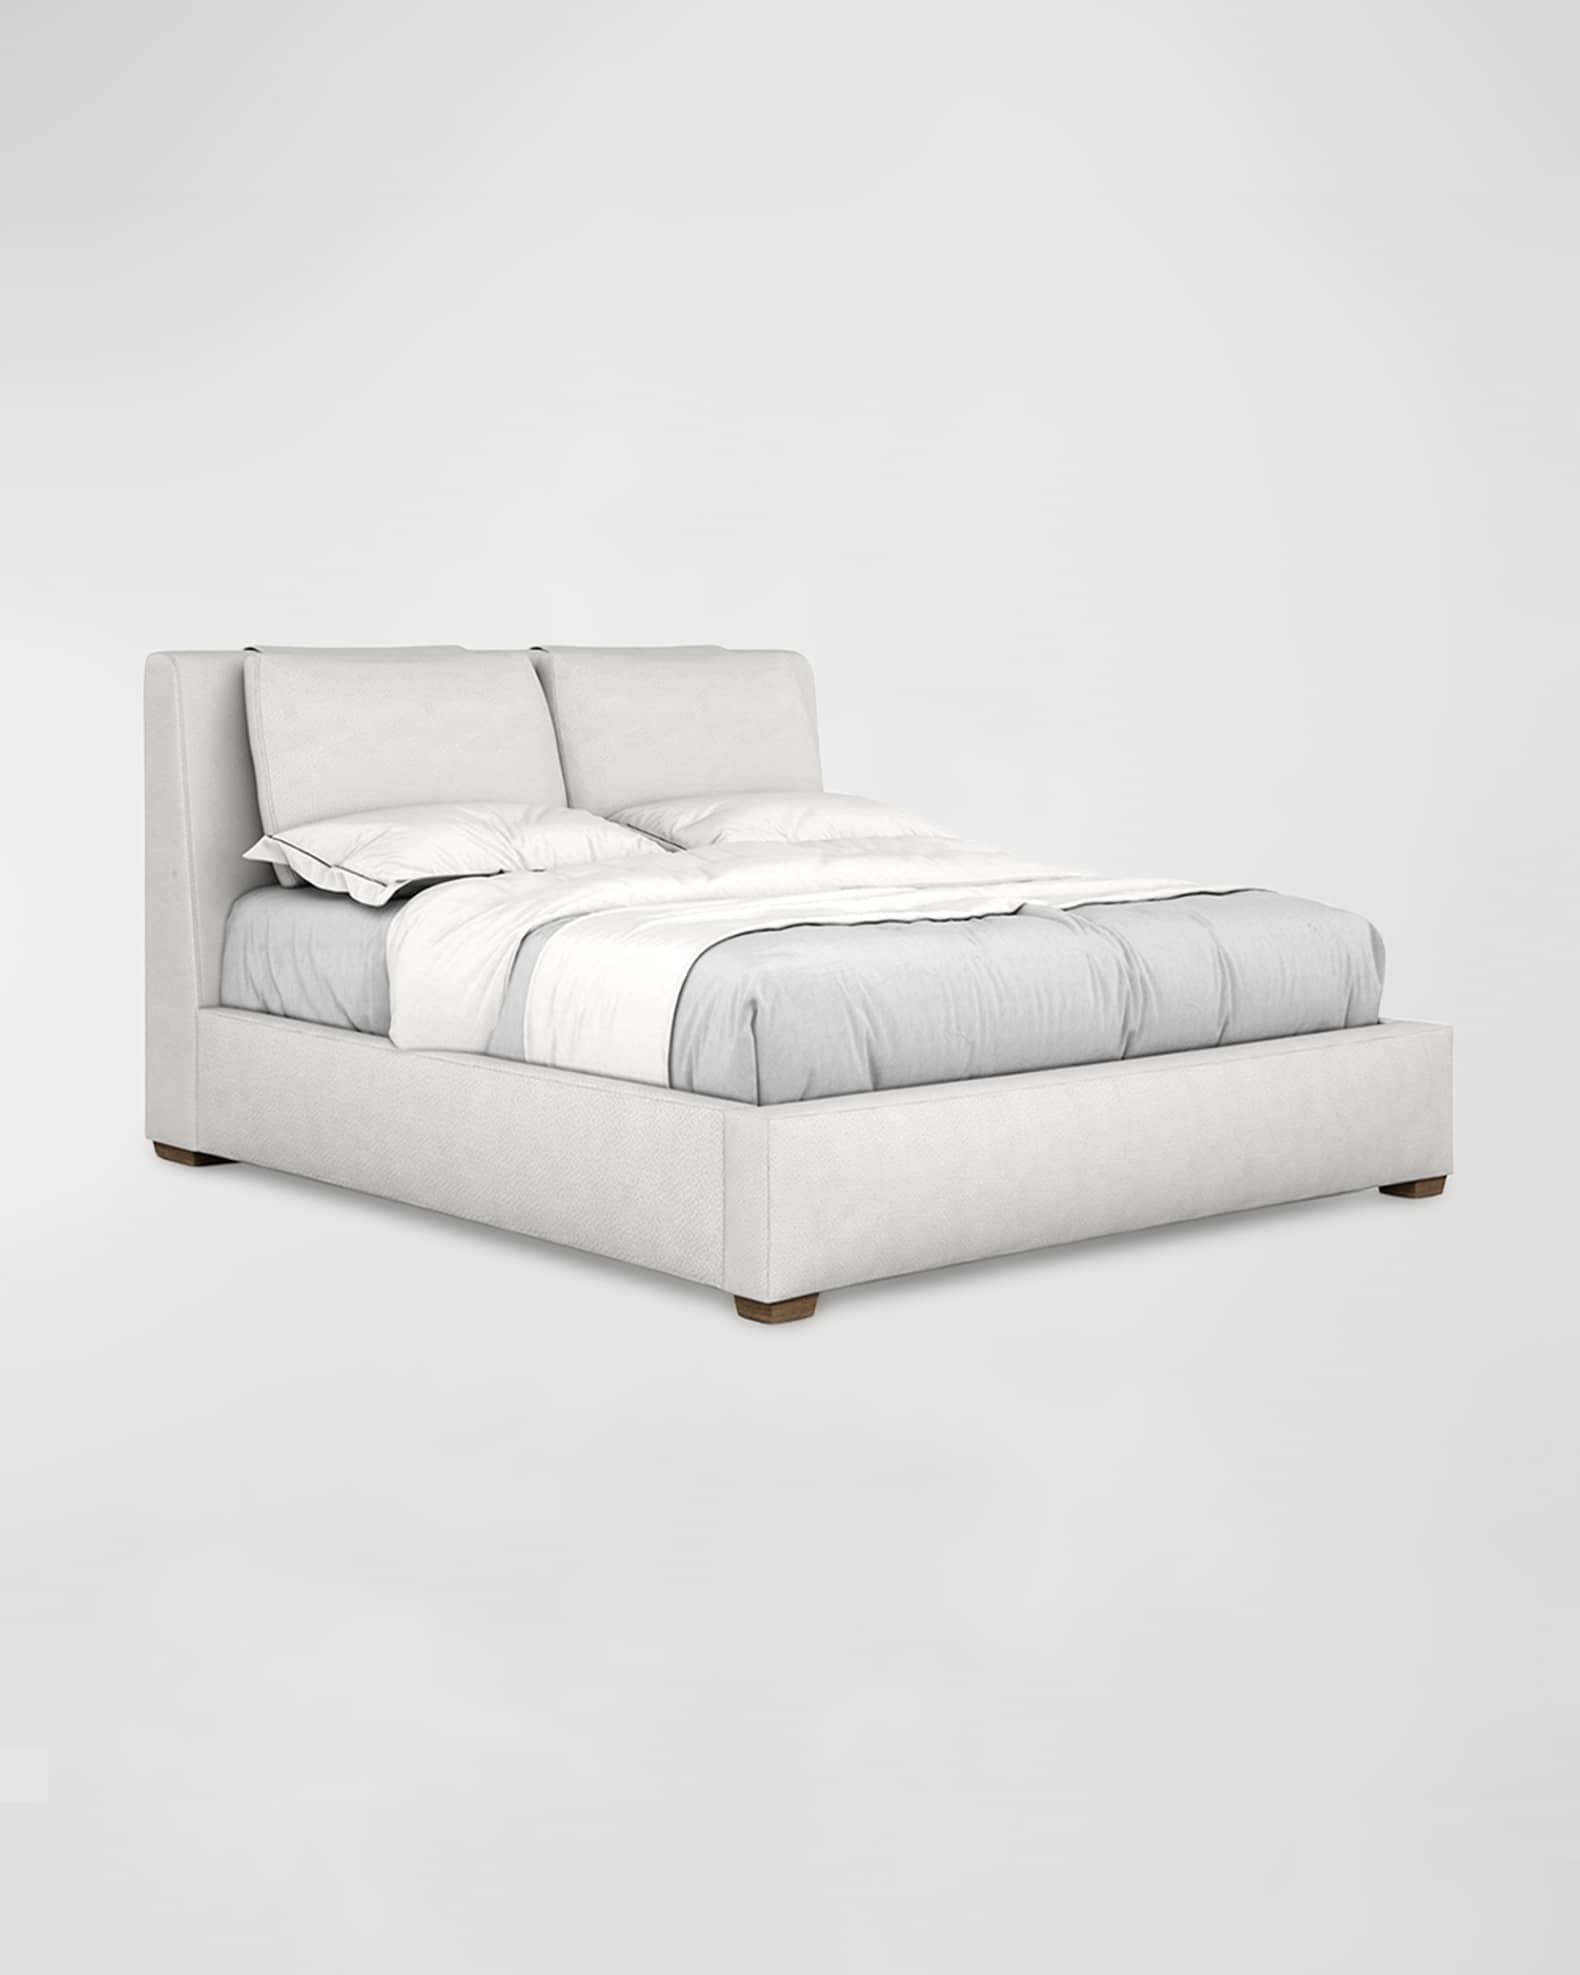 Oaklyn King Shelter Bed | Neiman Marcus